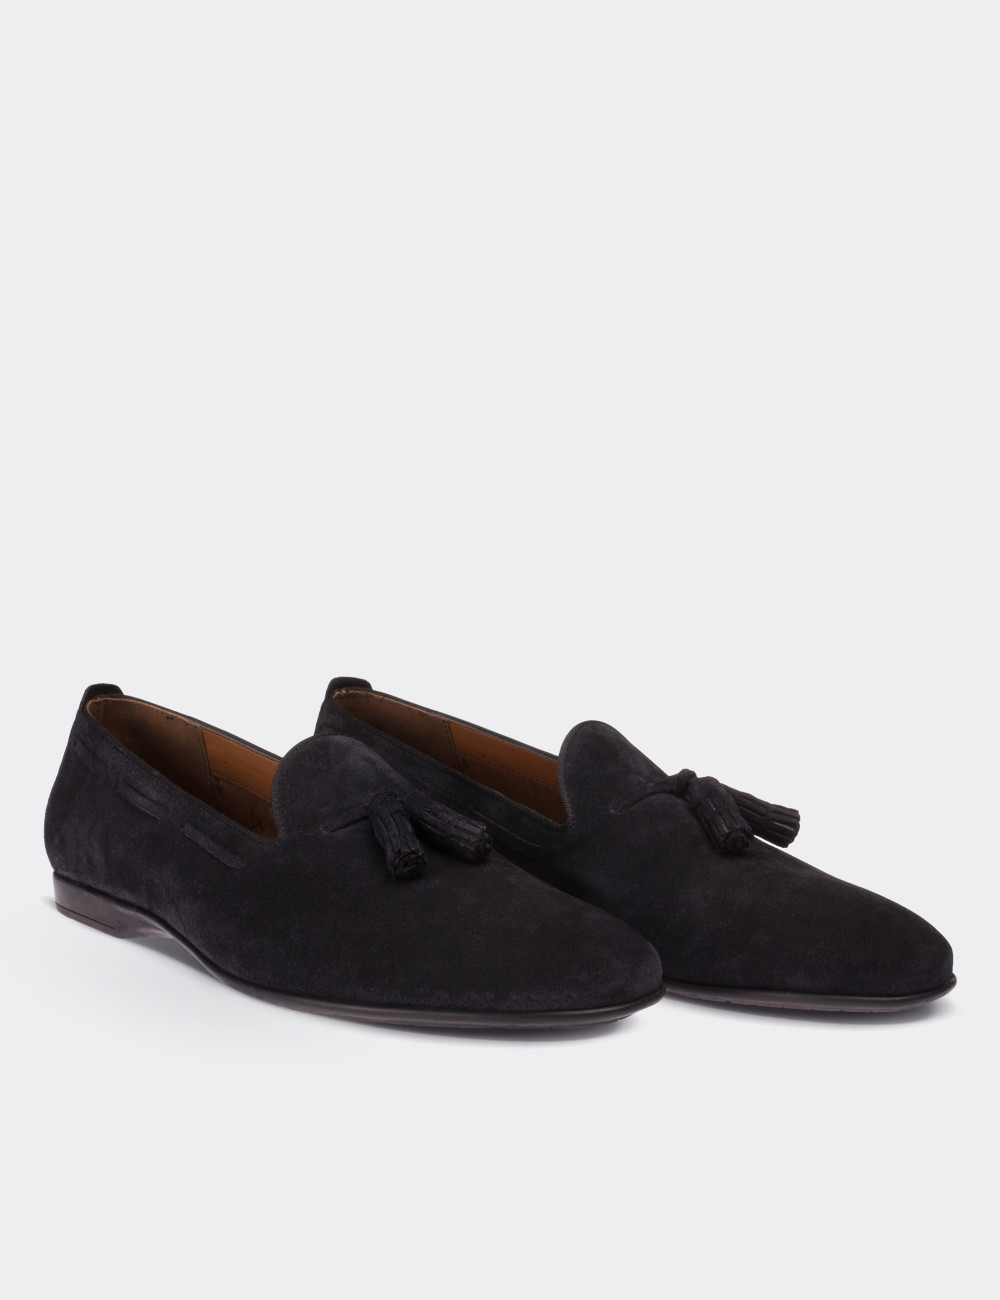 Navy Suede Leather Loafers - 01643MLCVC01